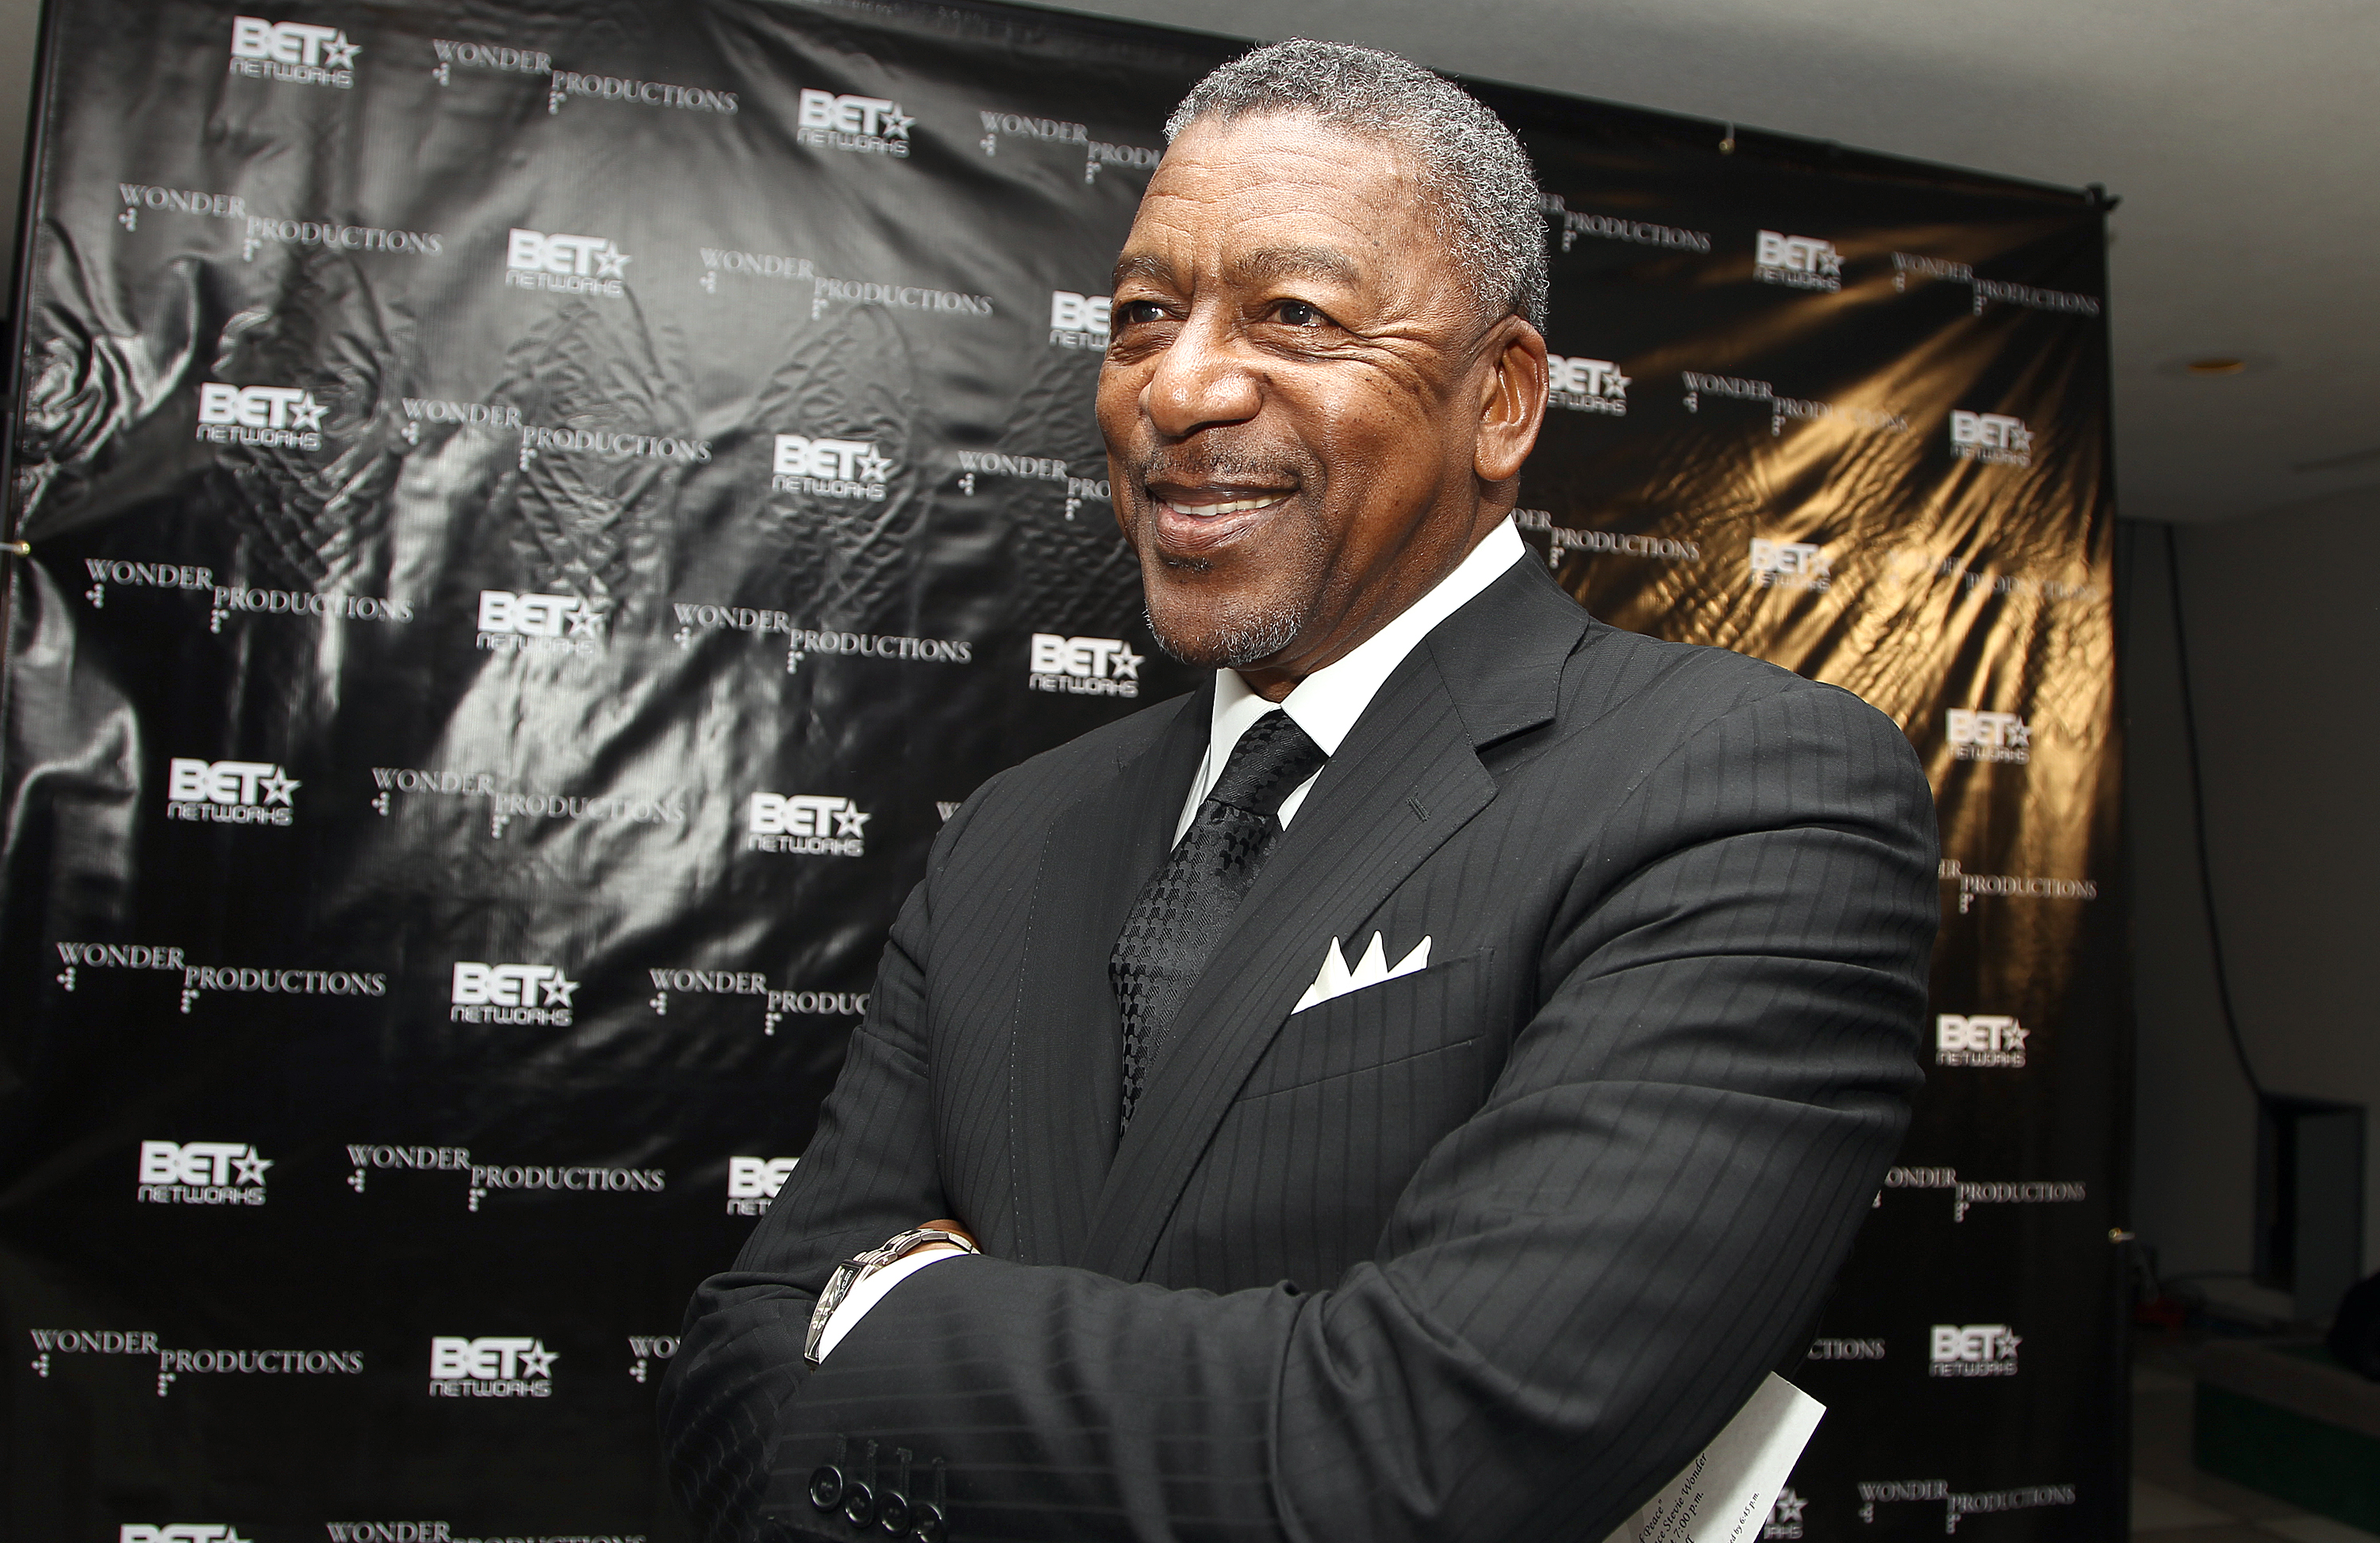 Bob Johnson, founder of BET, in New York, Oct. 24, 2012. (Donald Traill—Invision/AP)